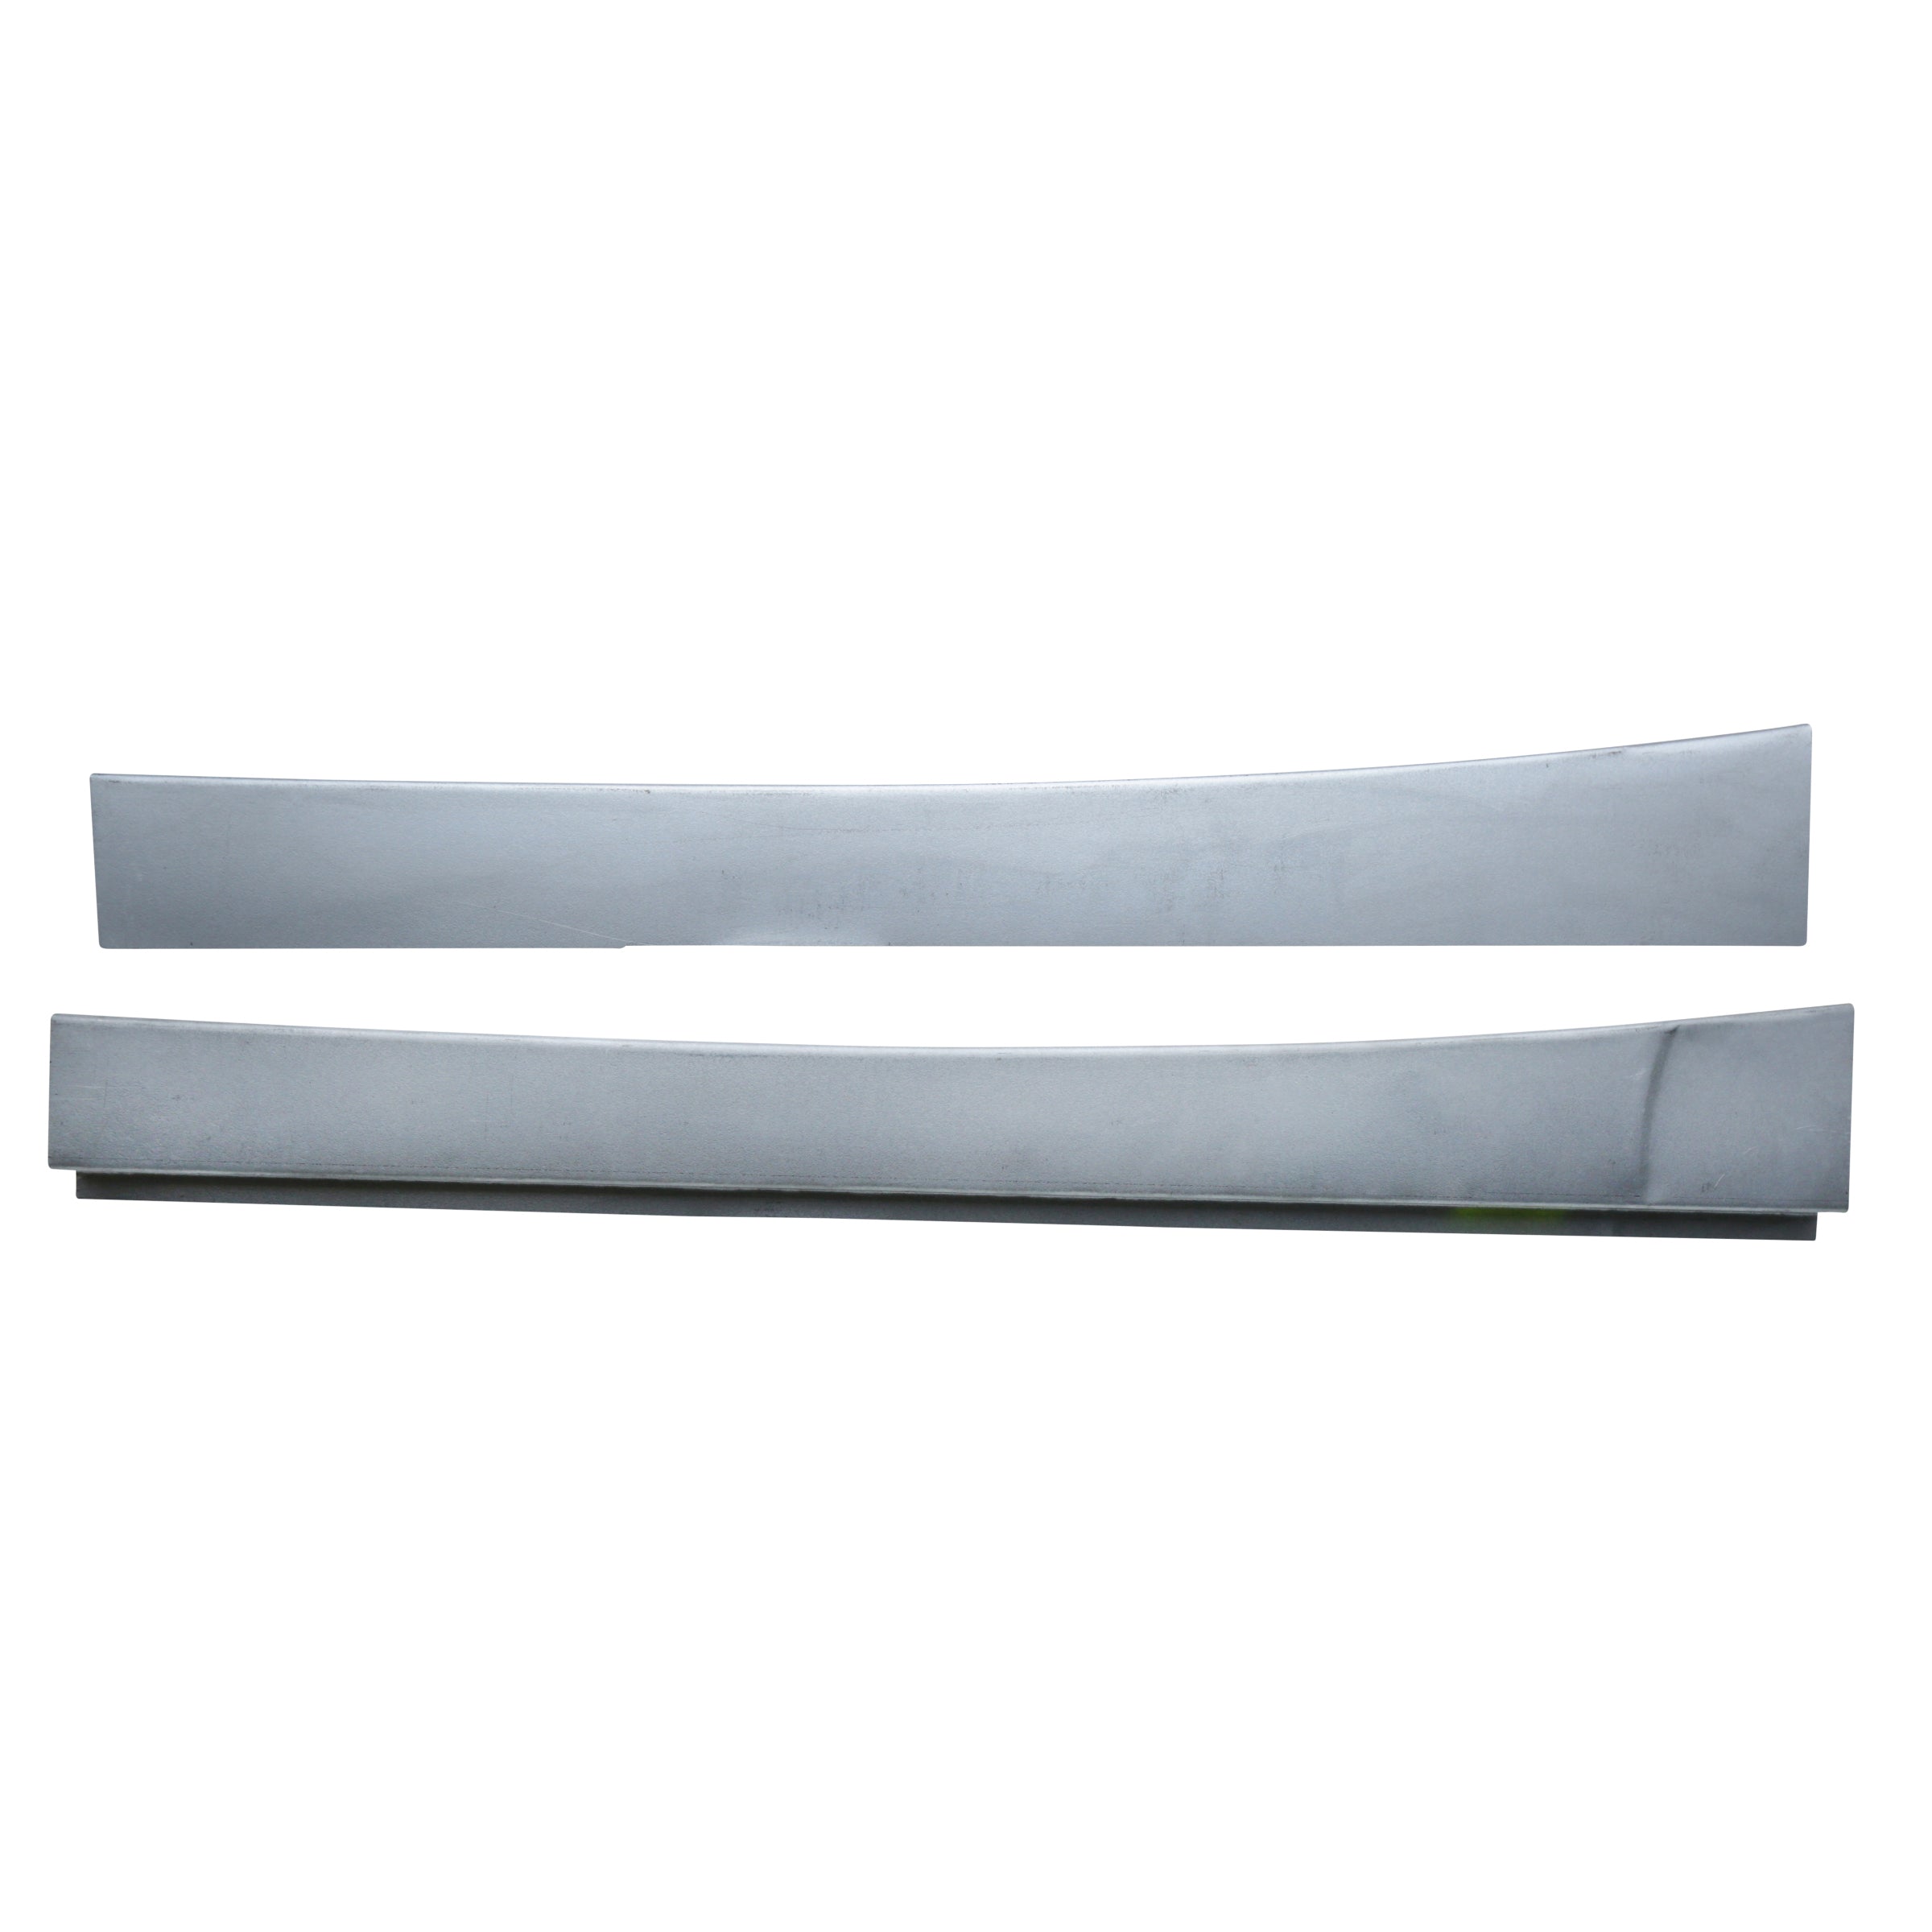 Rocker Panel Box (Center, Right) • 1941-48 Ford & Mercury Fordor, Business Coupe, & Sedan Delivery